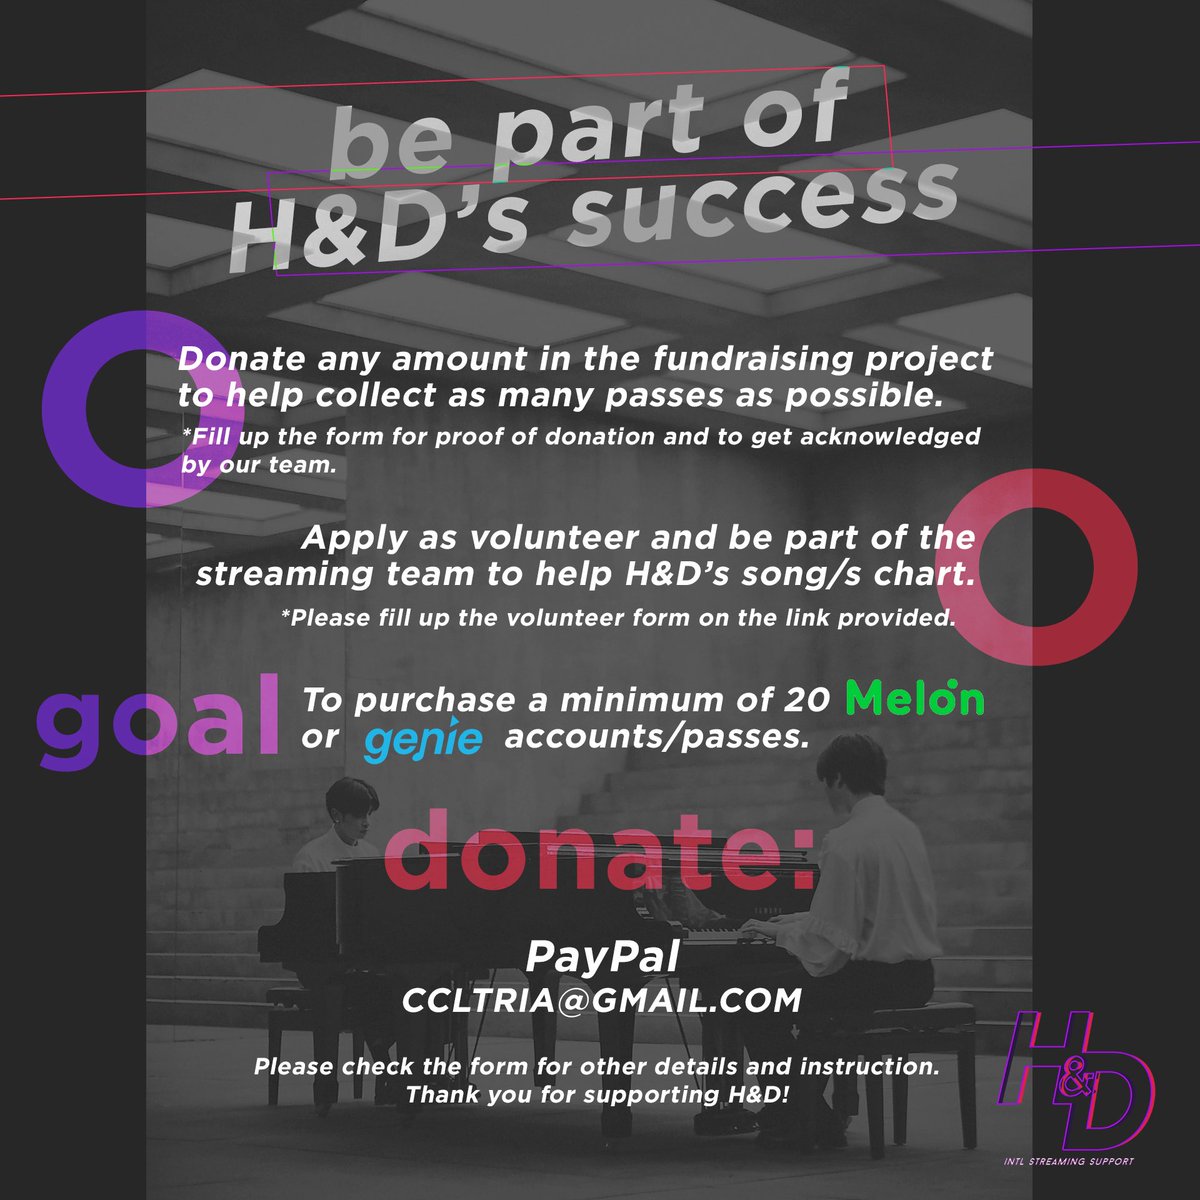  Fundraising Project for H&D  We will continually update through a progress bar. Donations will be closed by April 19 at 12 NN.  If you want to be a country representative please message us! Donate: https://forms.gle/jm2b4tFRVaQqdJTe9Or Volunteer: https://forms.gle/BF7BSvgYXriYh3cR8